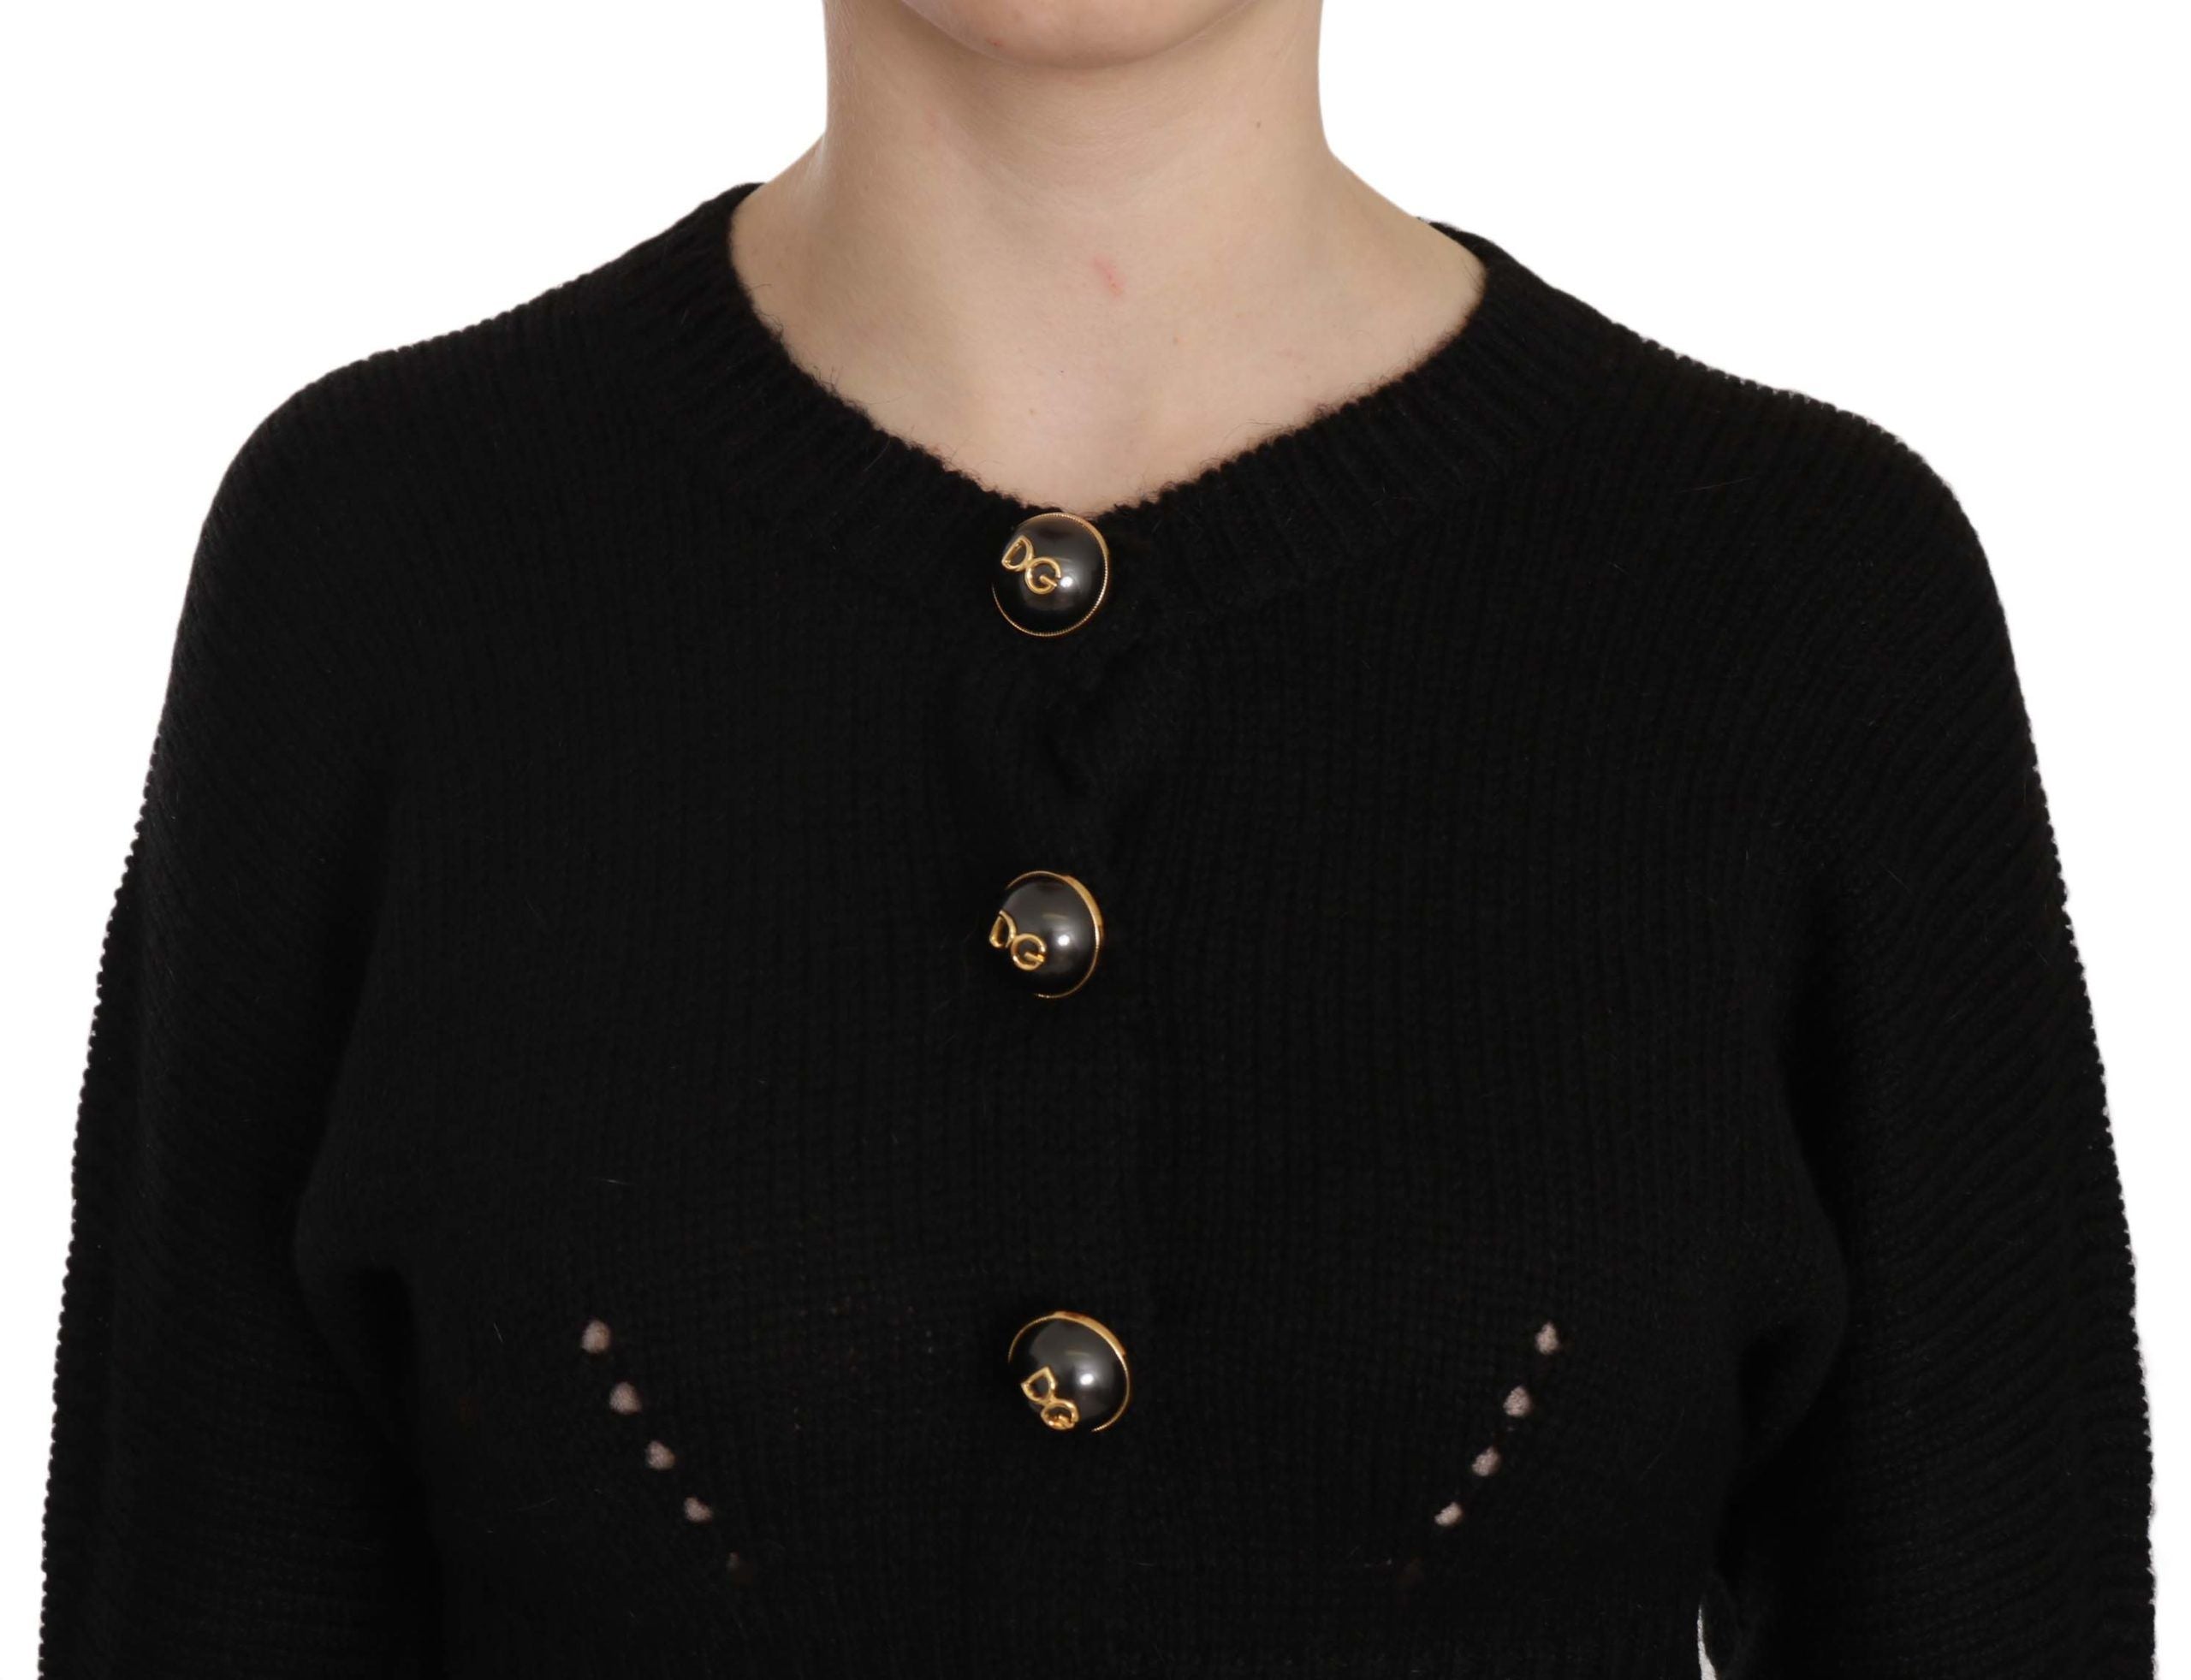 Dolce & Gabbana Chic Black Cropped Cardigan with Button Details